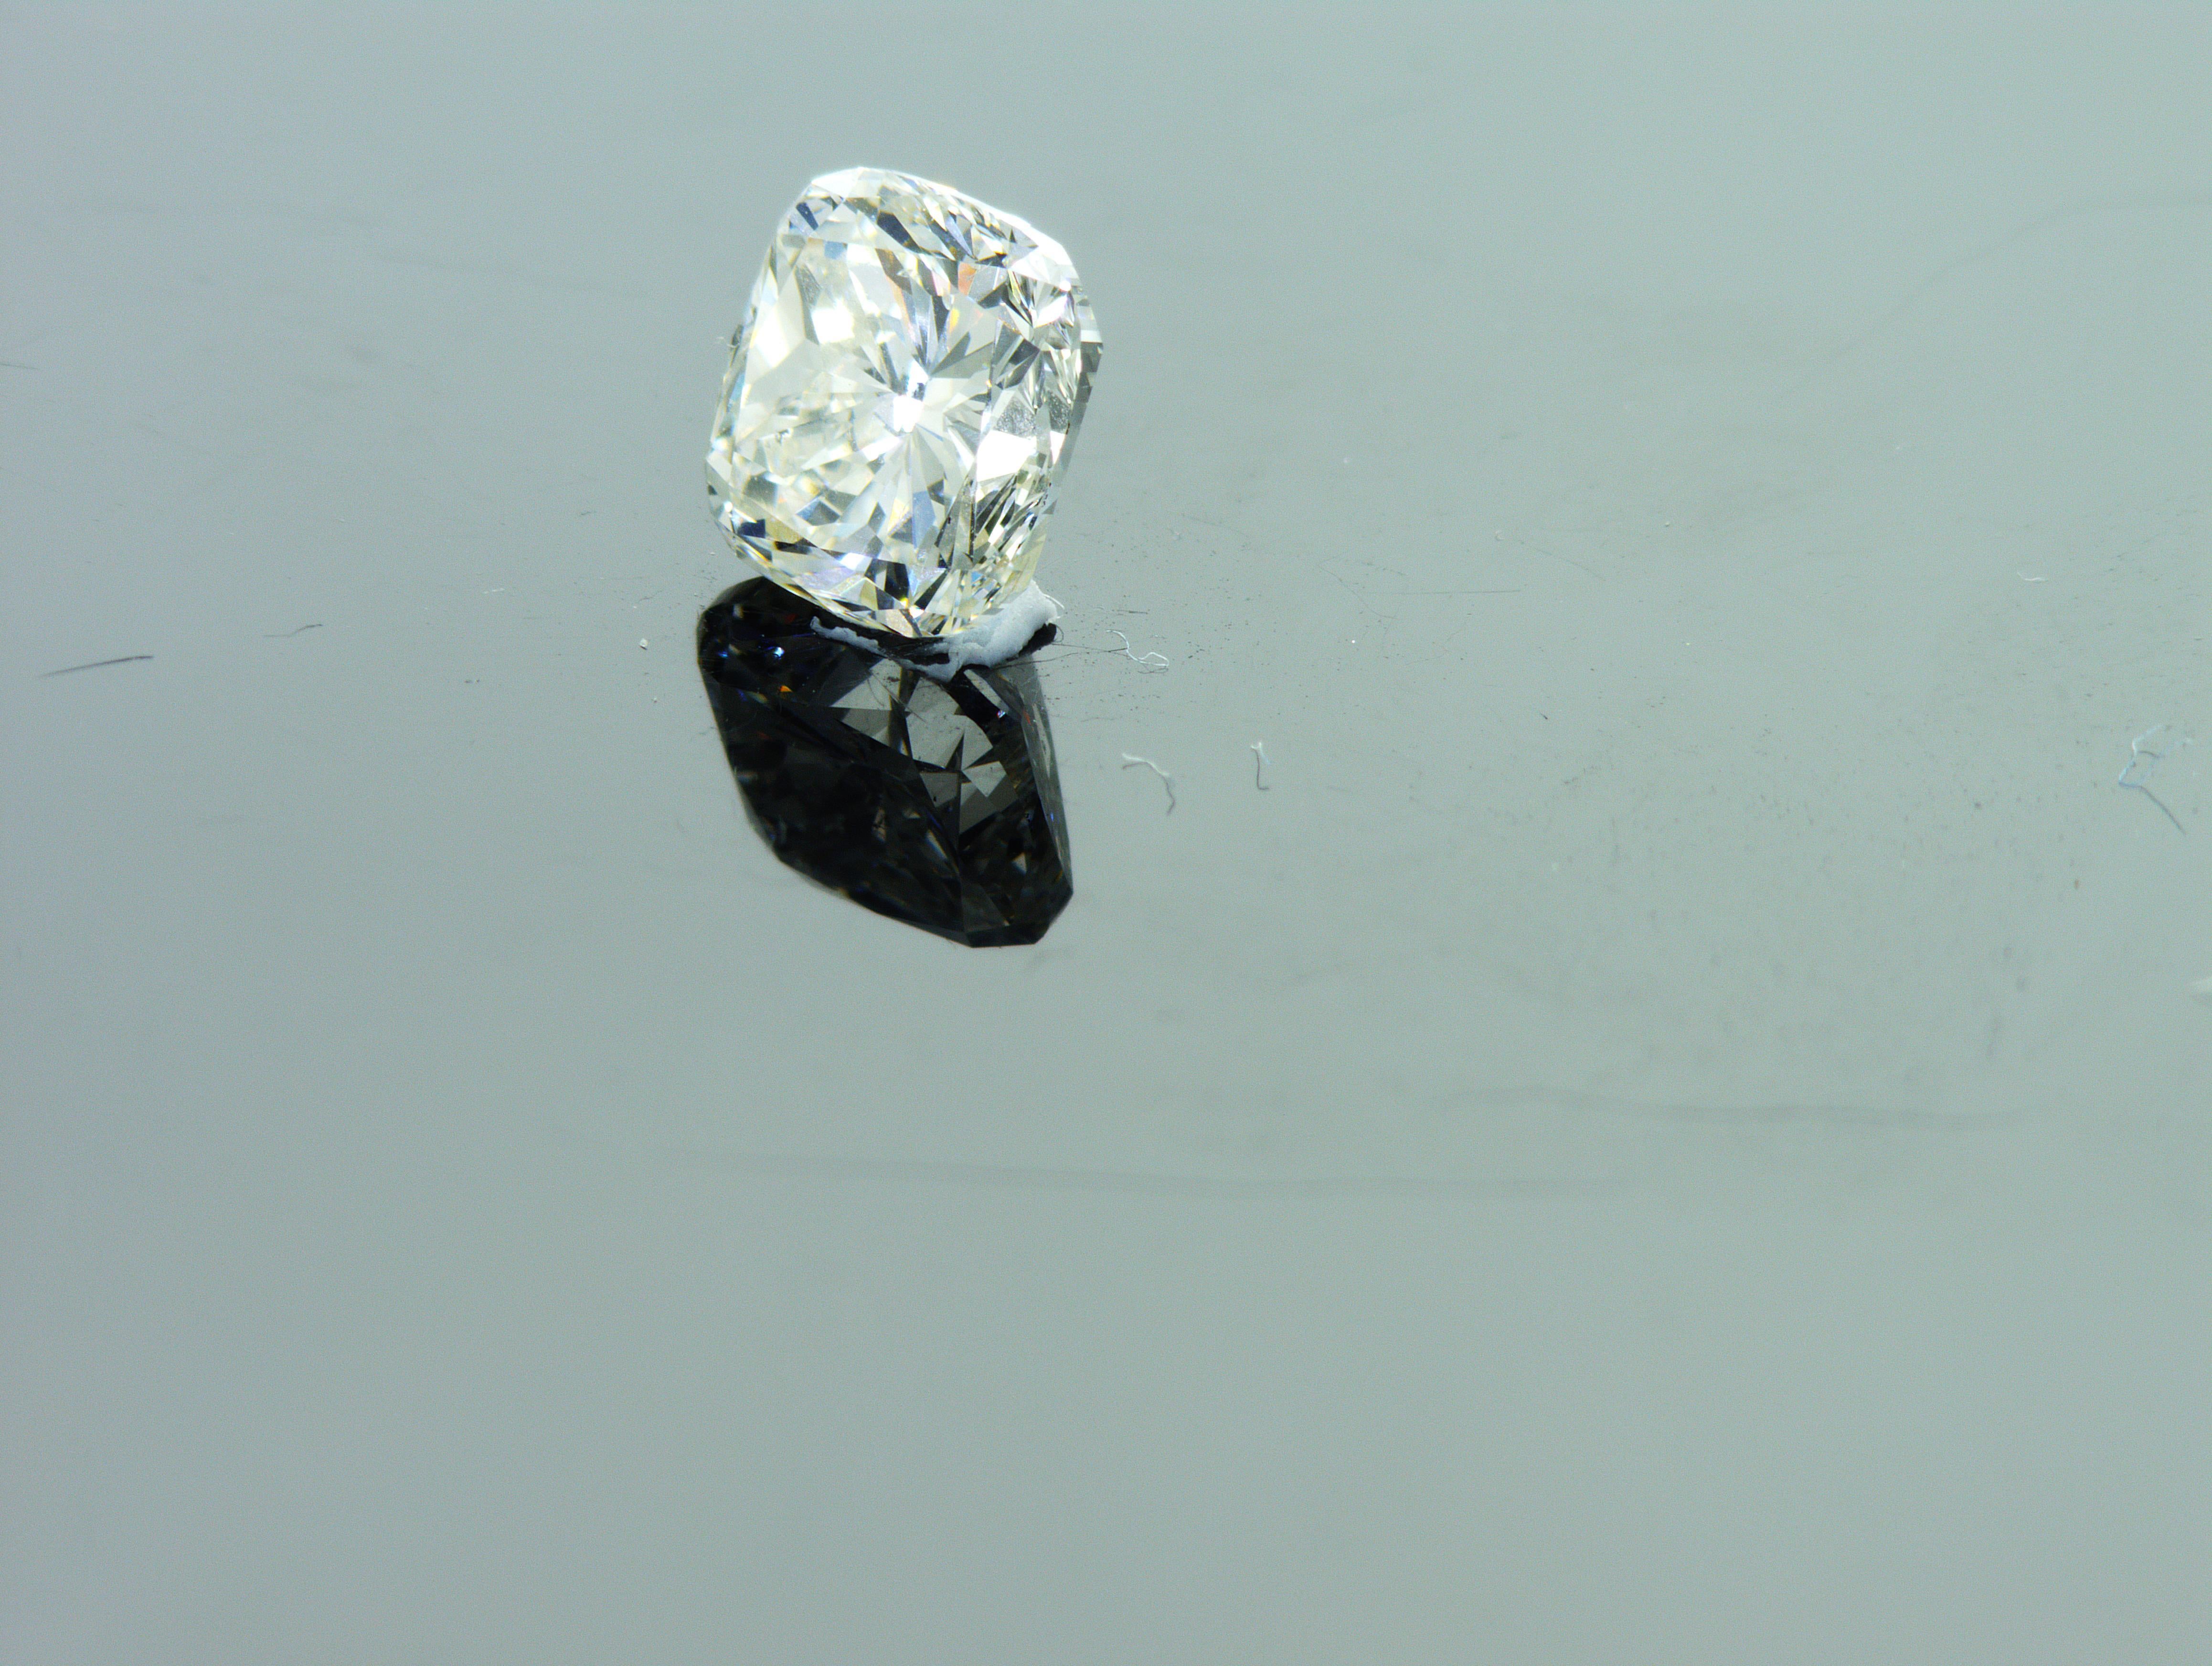 We are natural diamond production company located in Dubai. Rapaport price for this diamond is $2821.00, our price is -50% from the Rapaport price - $1411!!!! We ship world wide for free!!!!
Weight: 0.91ct
Shape: Cushion
Color: rare white